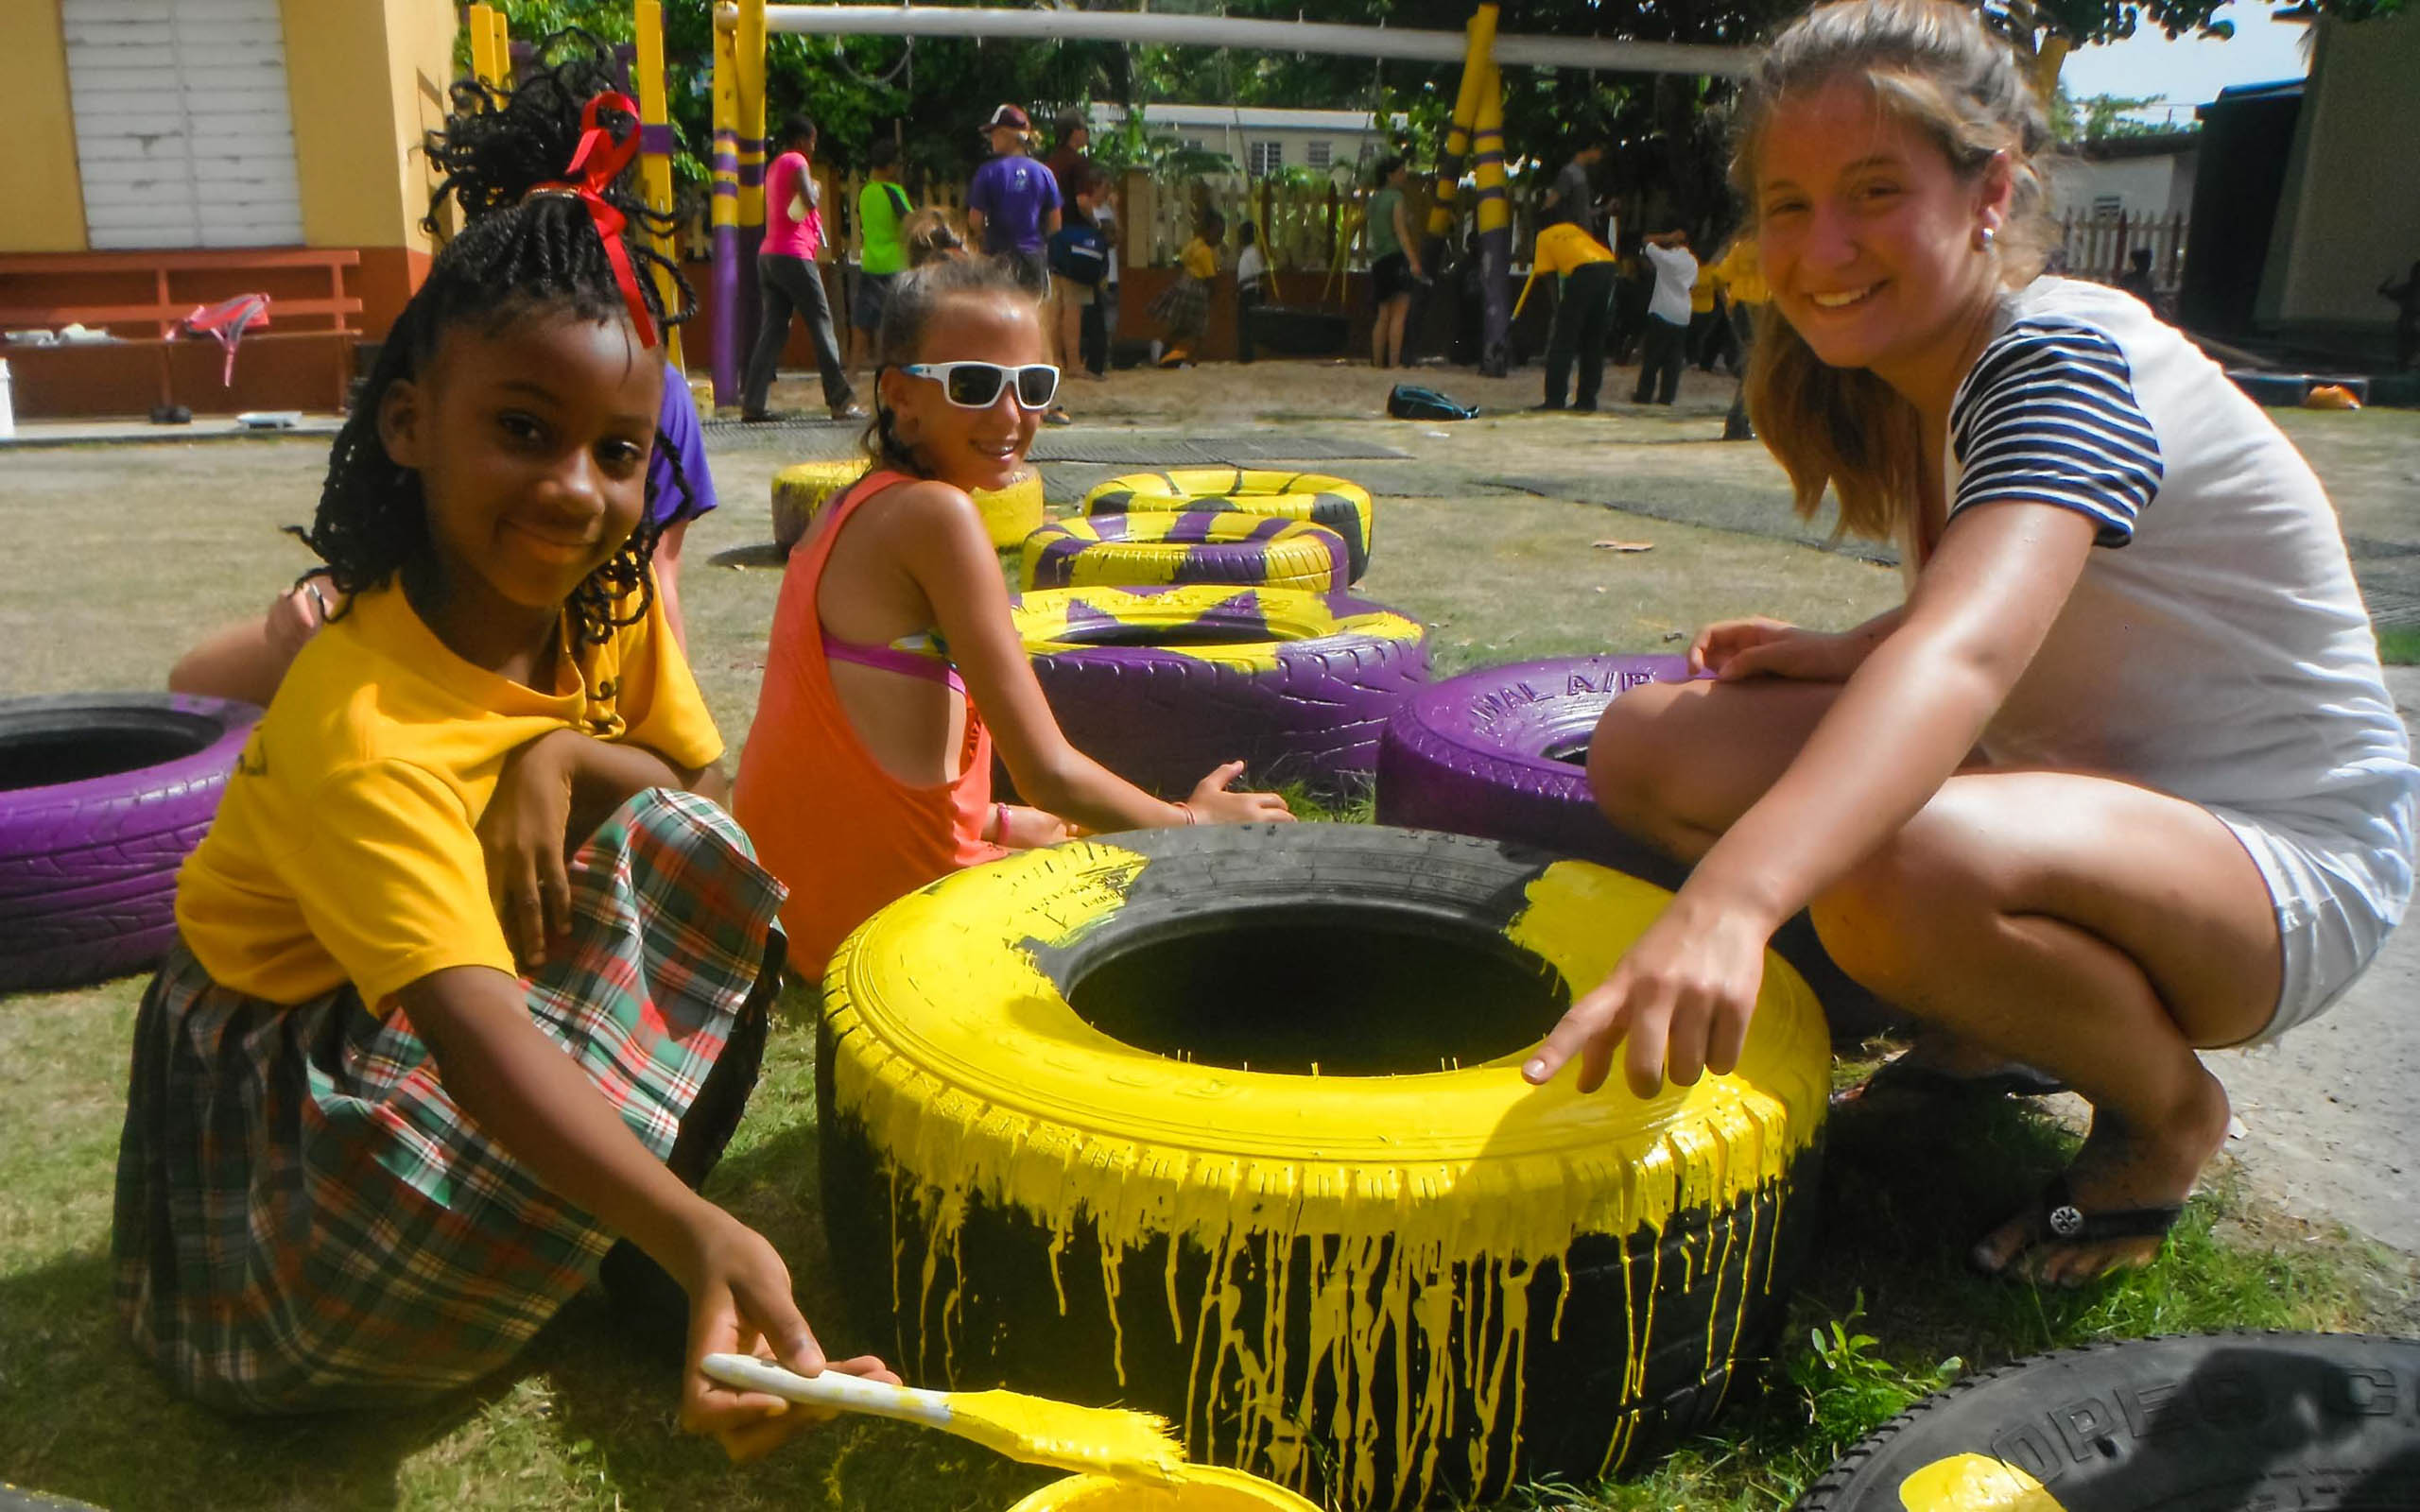 A group of girls painting tires on a grassy area.